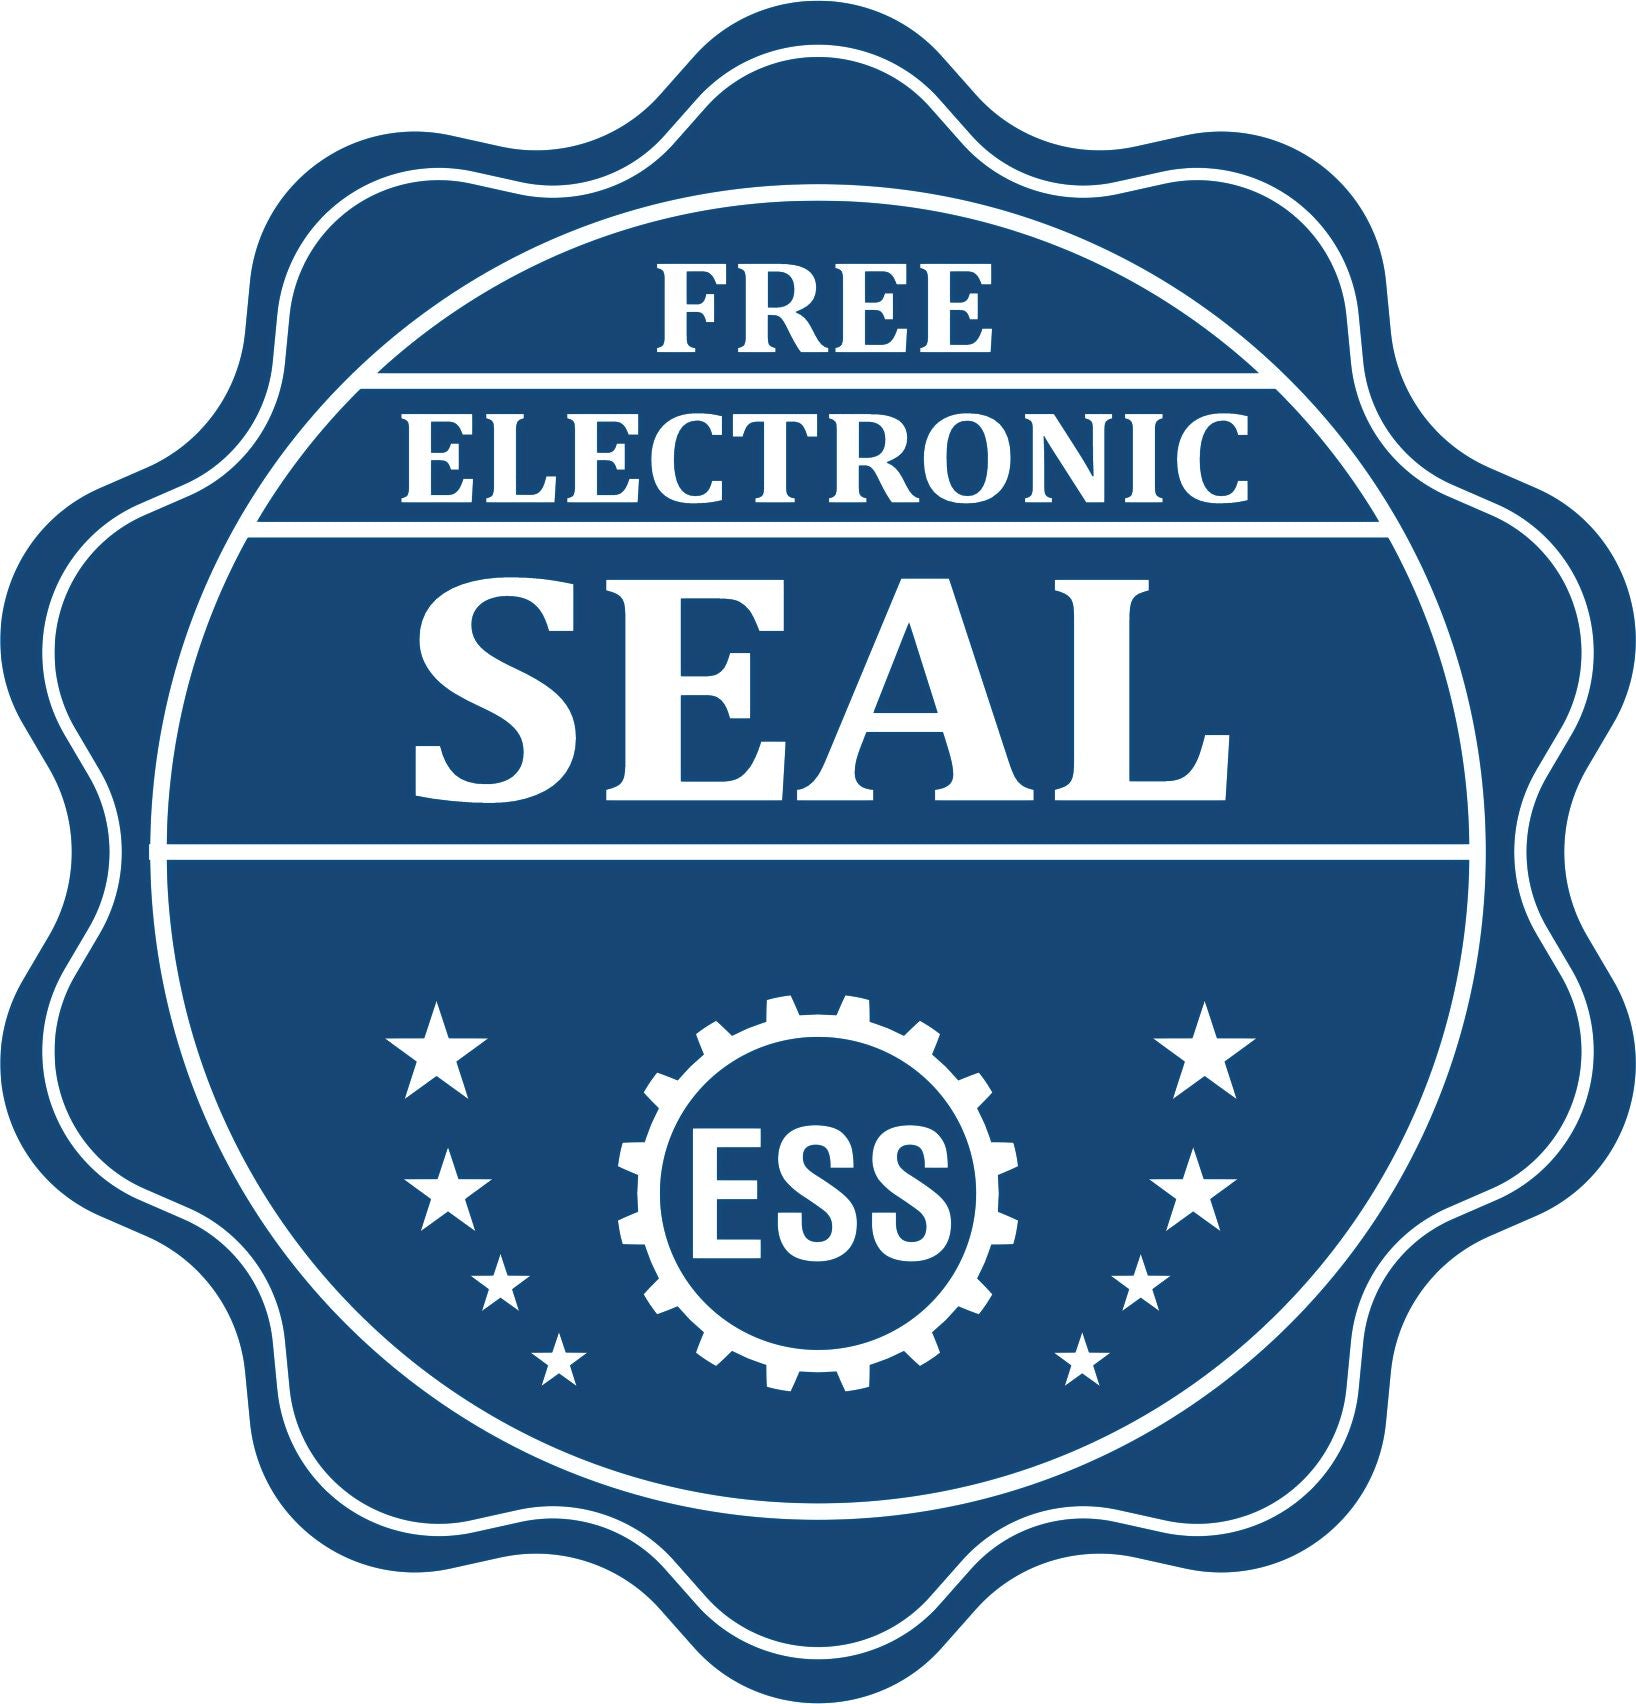 A badge showing a free electronic seal for the Slim Pre-Inked Georgia Professional Engineer Seal Stamp with stars and the ESS gear on the emblem.